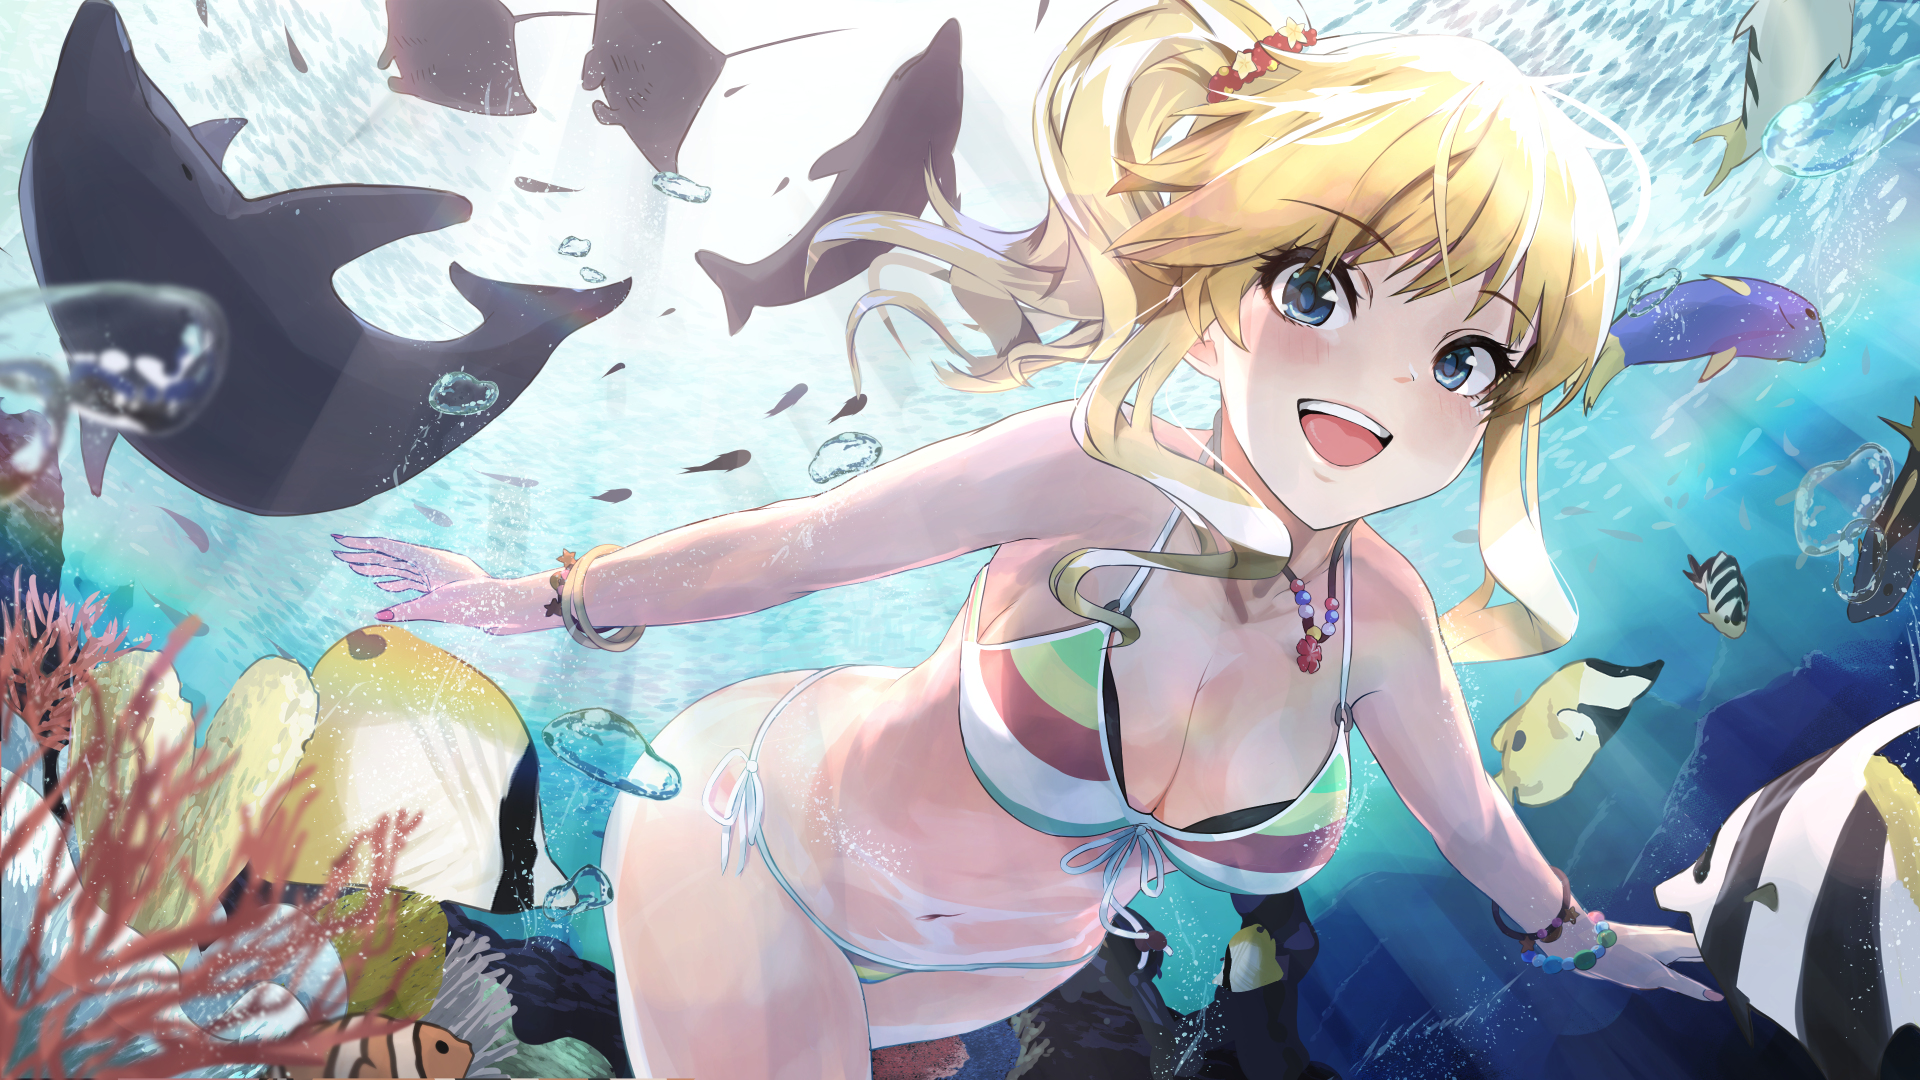 Anime 1920x1080 anime girls blonde underwater bikini big boobs Ootsuki Yui THE iDOLM@STER water blue eyes swimming cleavage looking at viewer fish bubbles smiling open mouth ponytail swimwear sunlight coral animals bracelets necklace